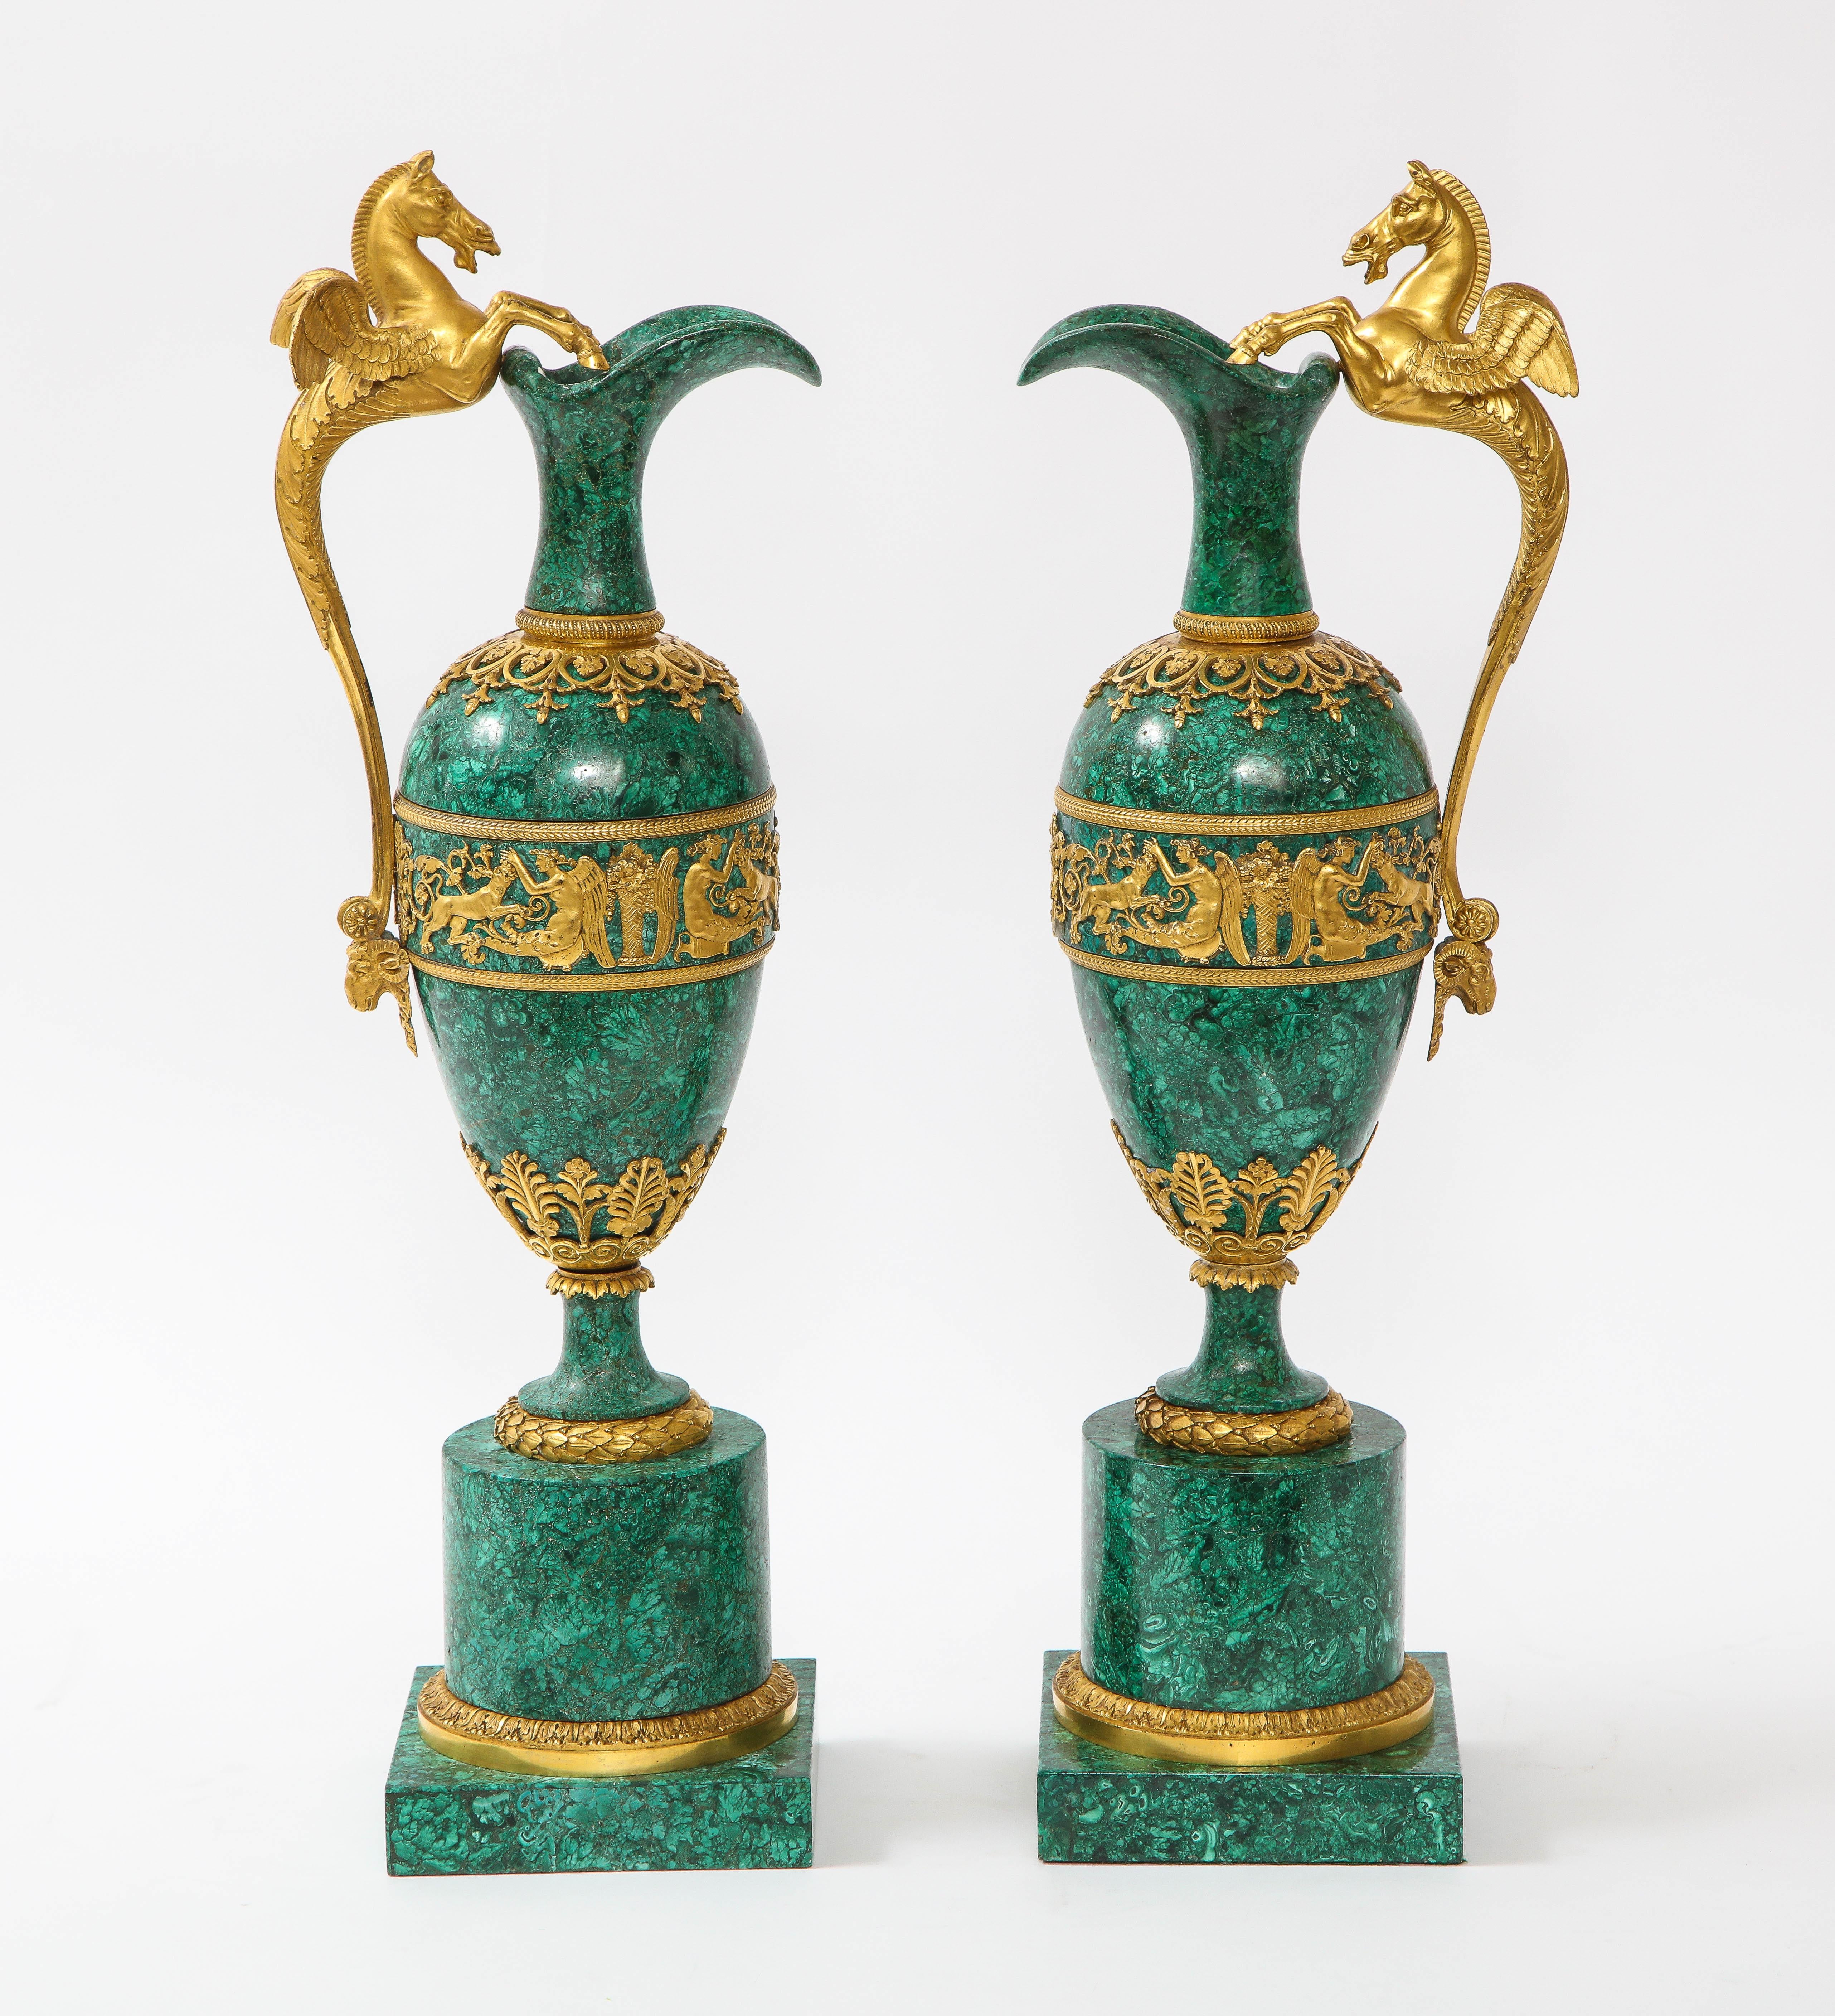 A pair of Empire Ormolu-Mounted Malachite Ewers attributed to Claude Galle, circa 1805, Possibly Made For The Russian Market. Each with an ovoid body applied with an ormolu band depicting winged figures feeding with panthers, the top and base with